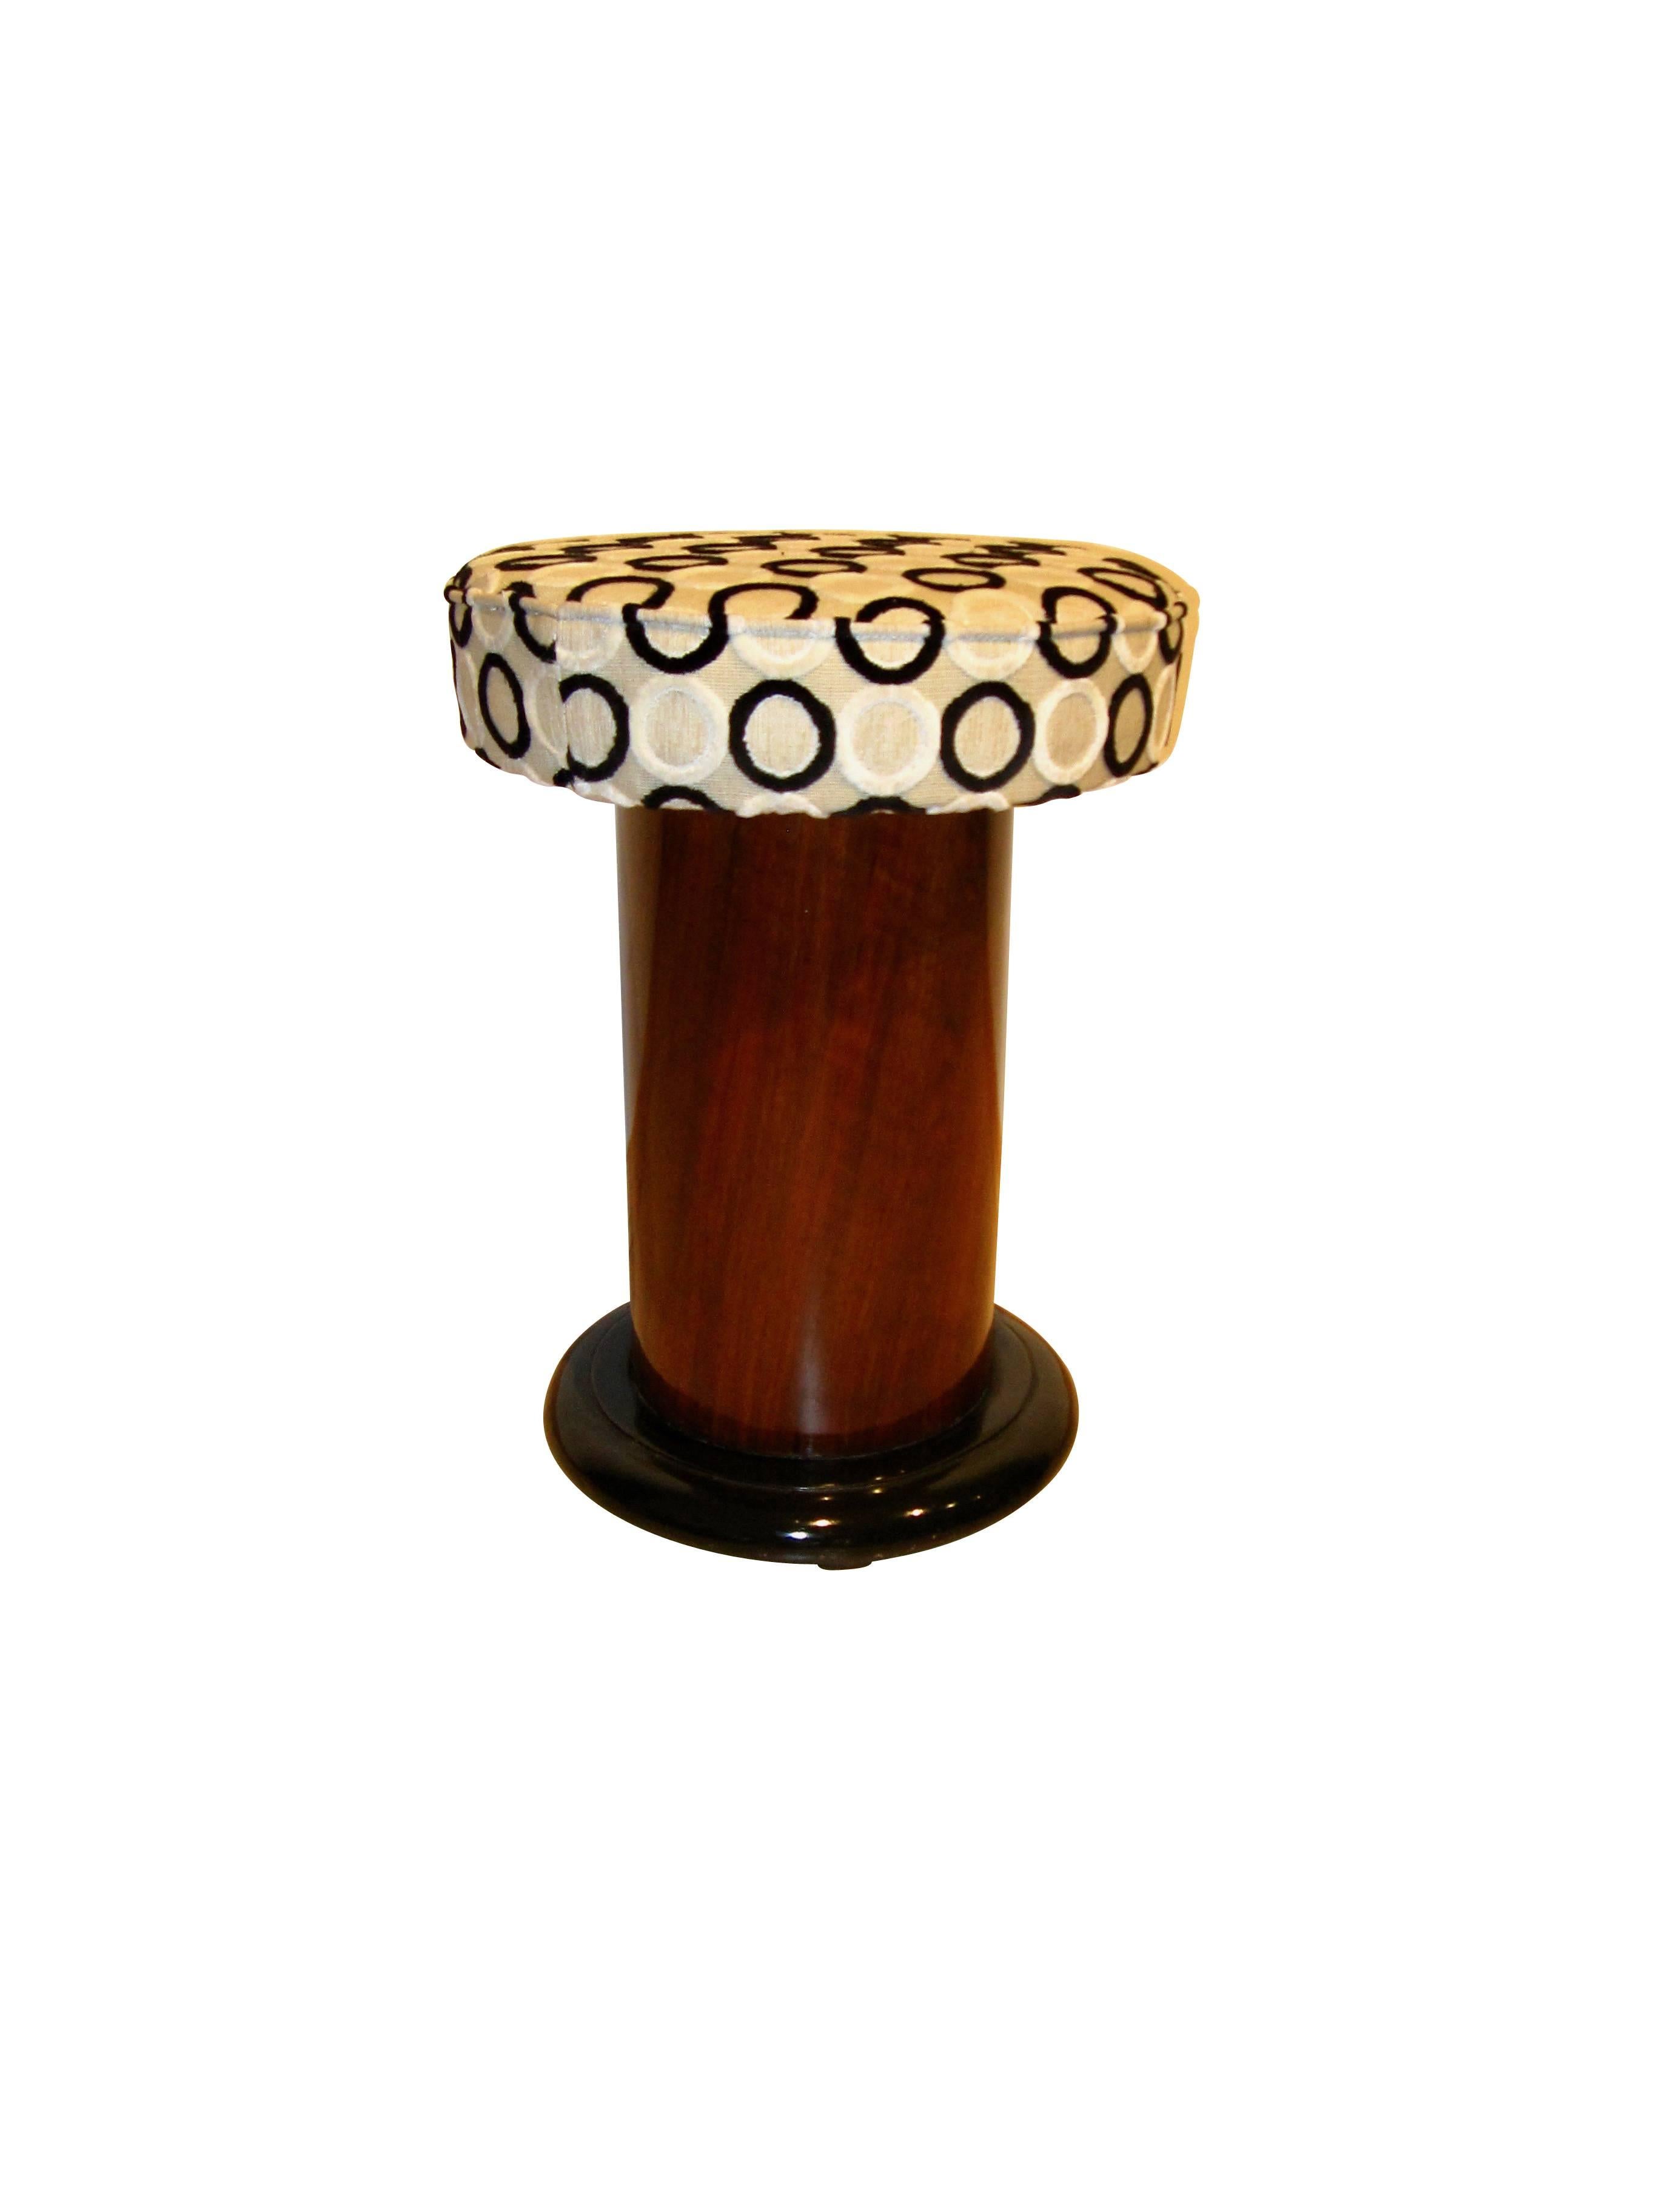 Petite, round Art Deco Stool / Pouff made from Walnut Veneer and ebonized wood for the leg. 

All wooden parts are restored and hand-polished with shellac.
The upholstery fabric is 